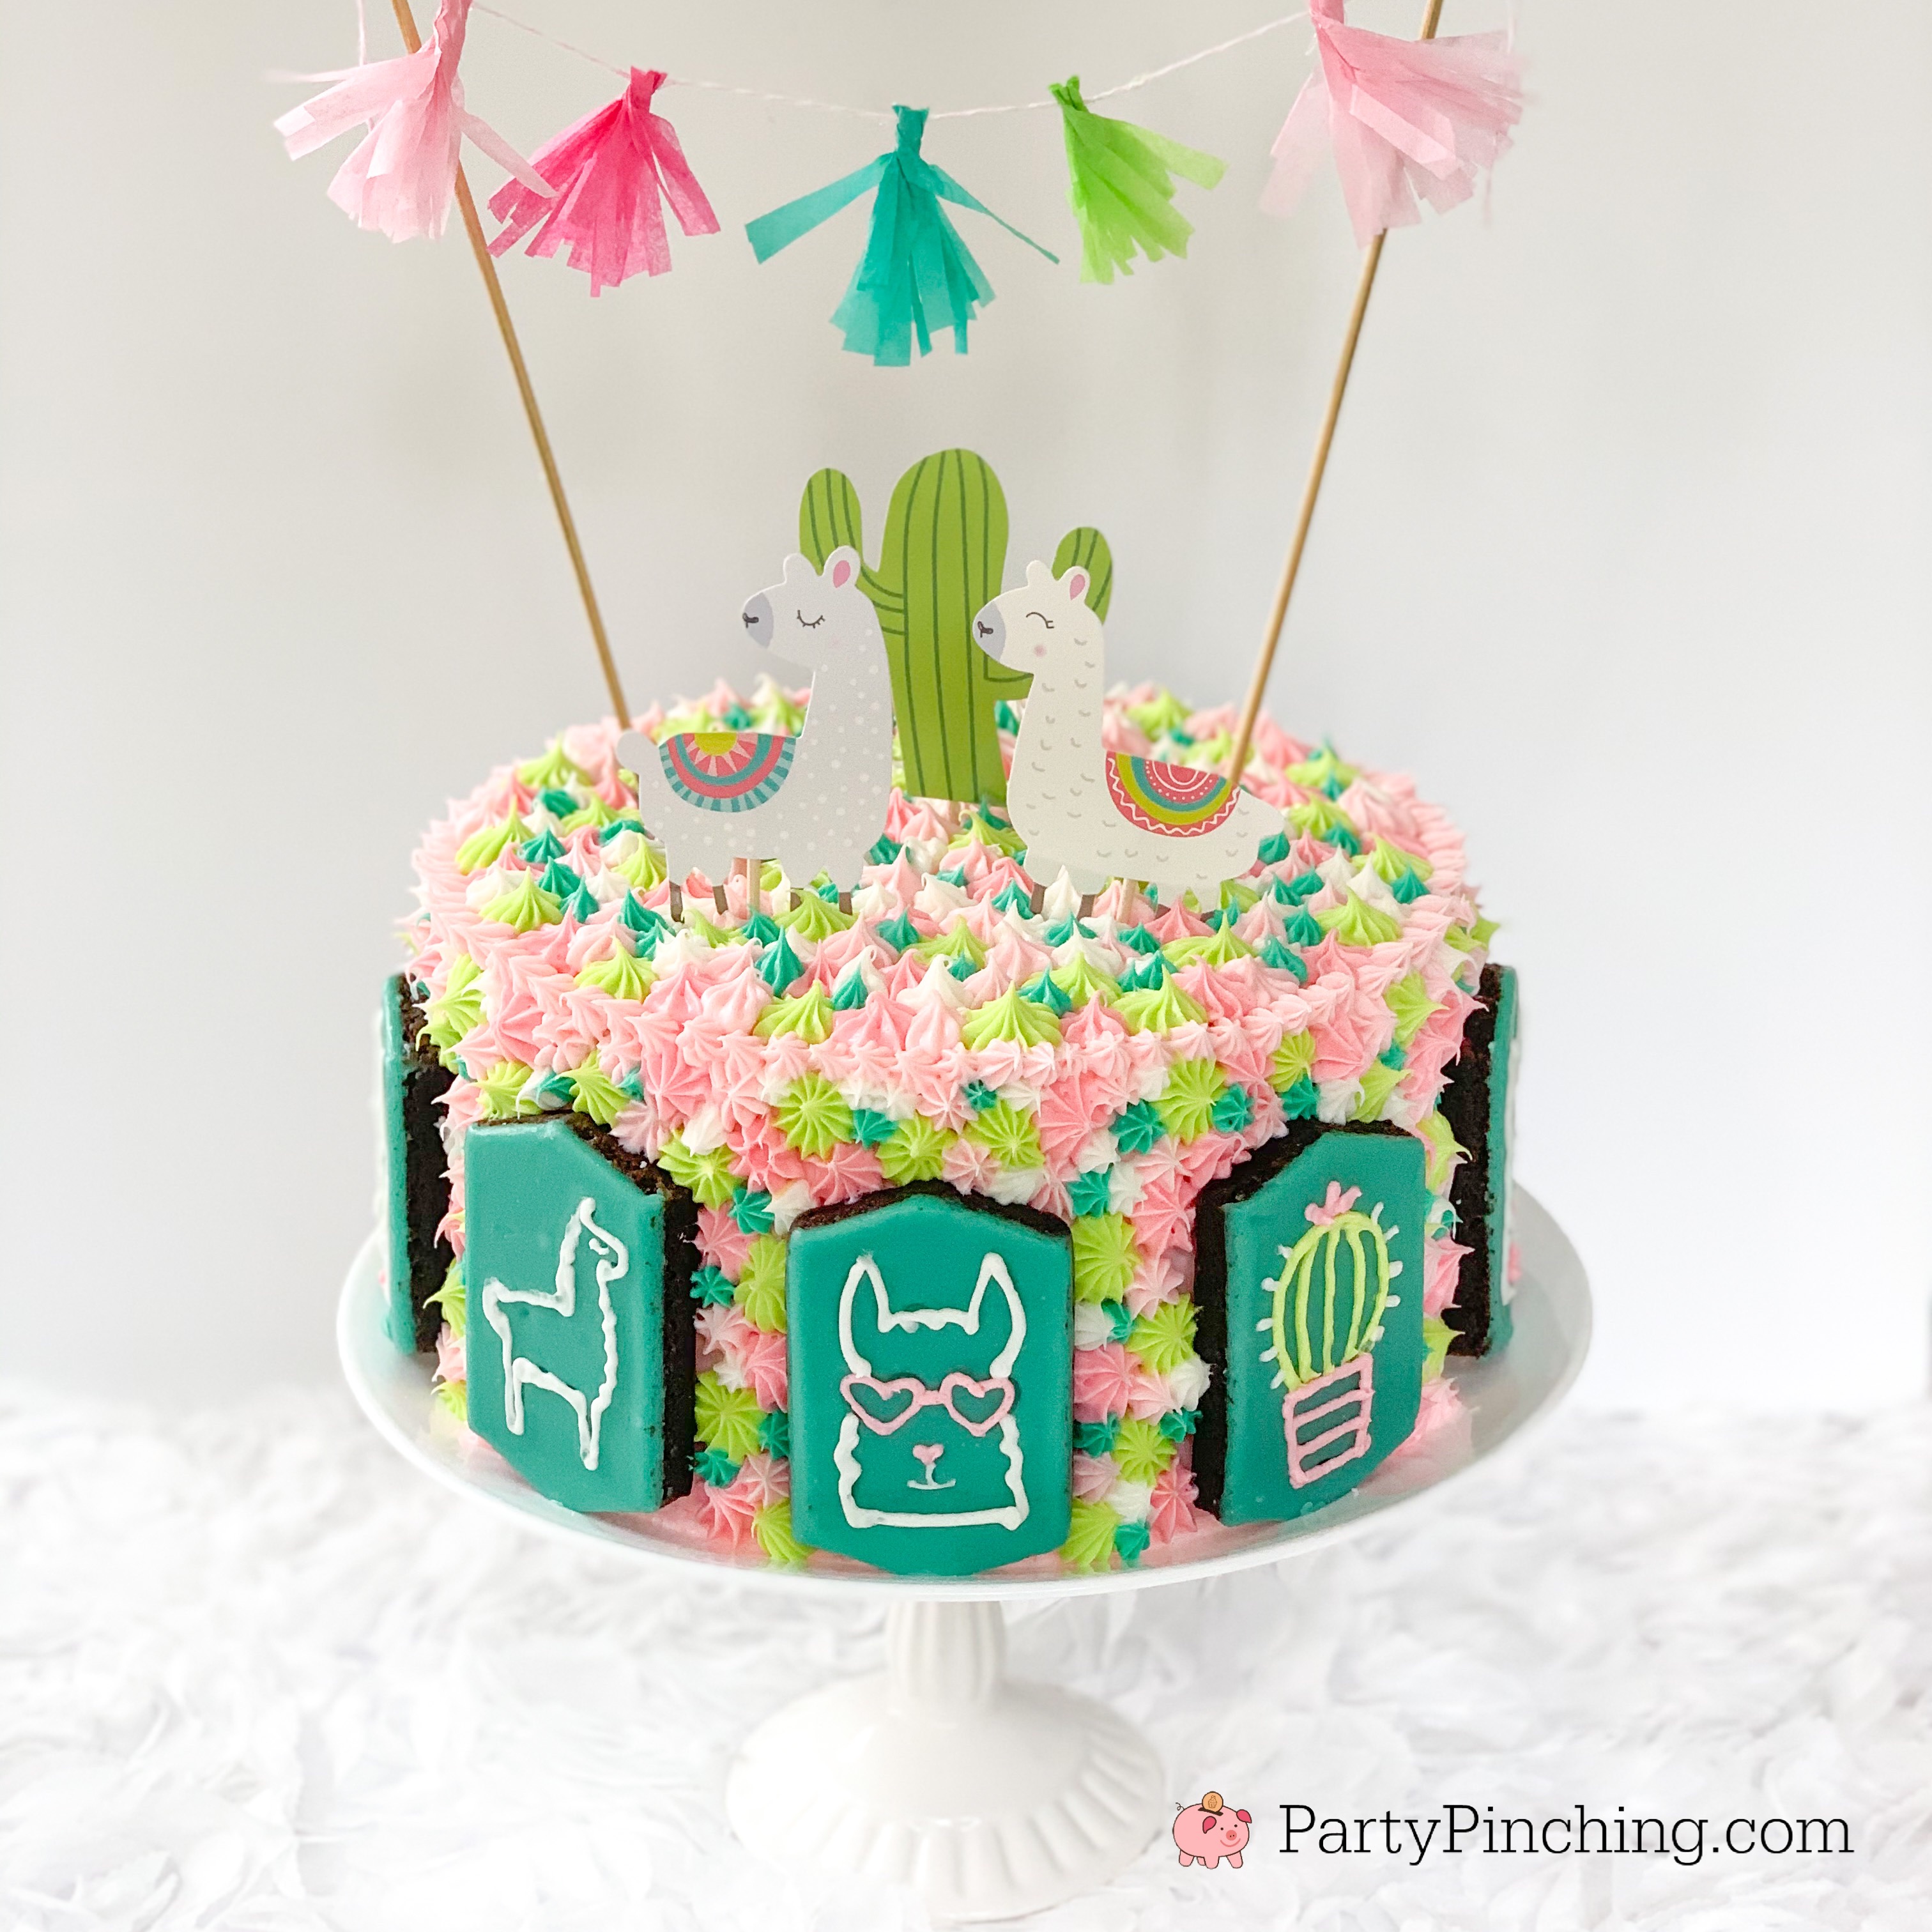 How to Make a DIY Naked Cake for a Baby Shower or Party